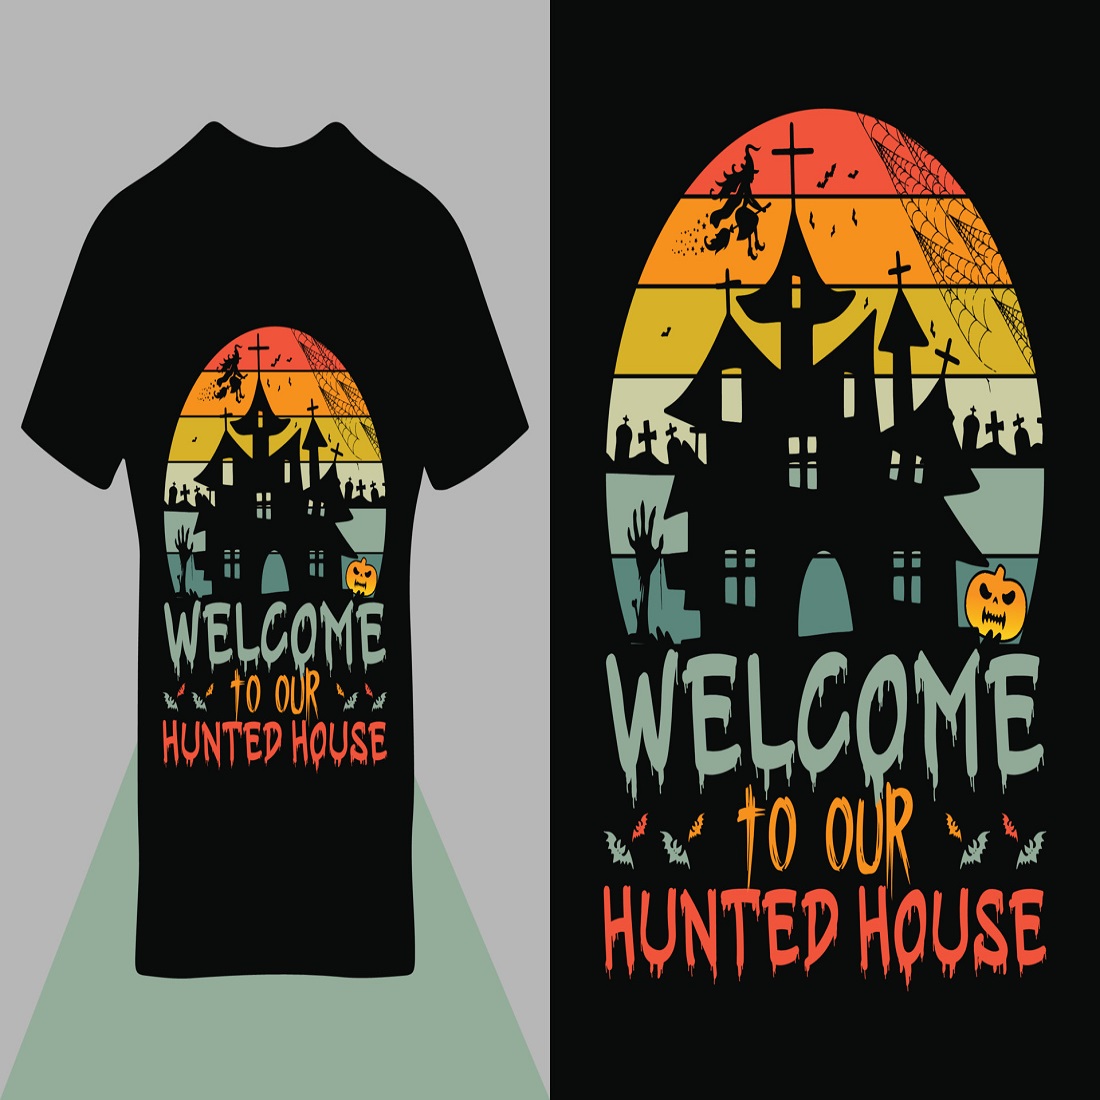 Welcome to our Hunted house cover image.